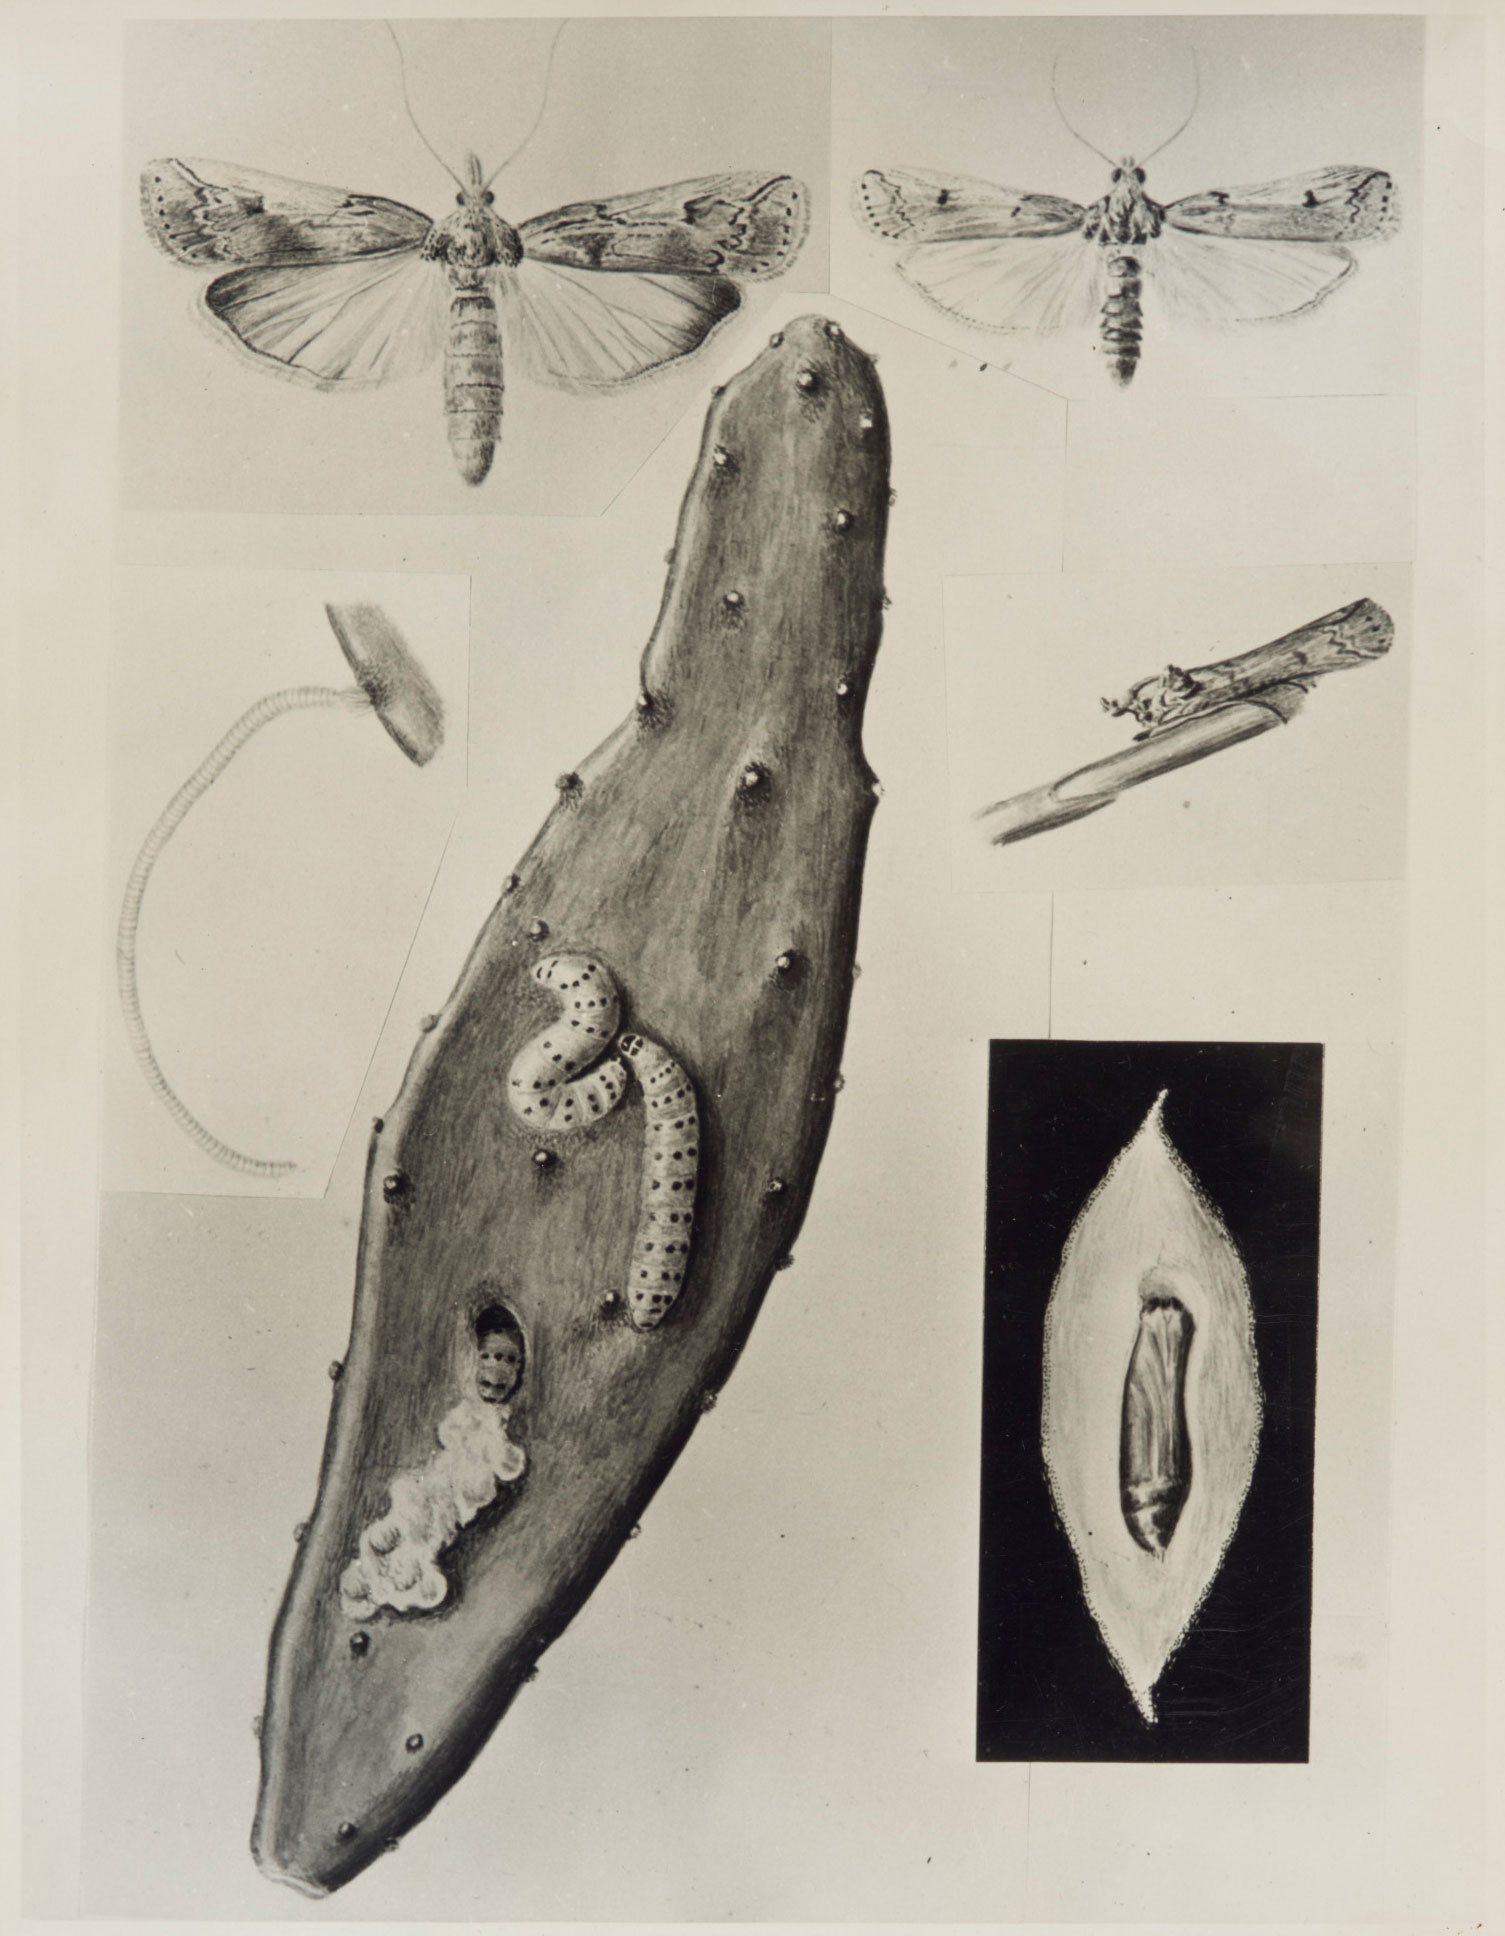 Drawings of the Cactoblastis moth and its larvae.